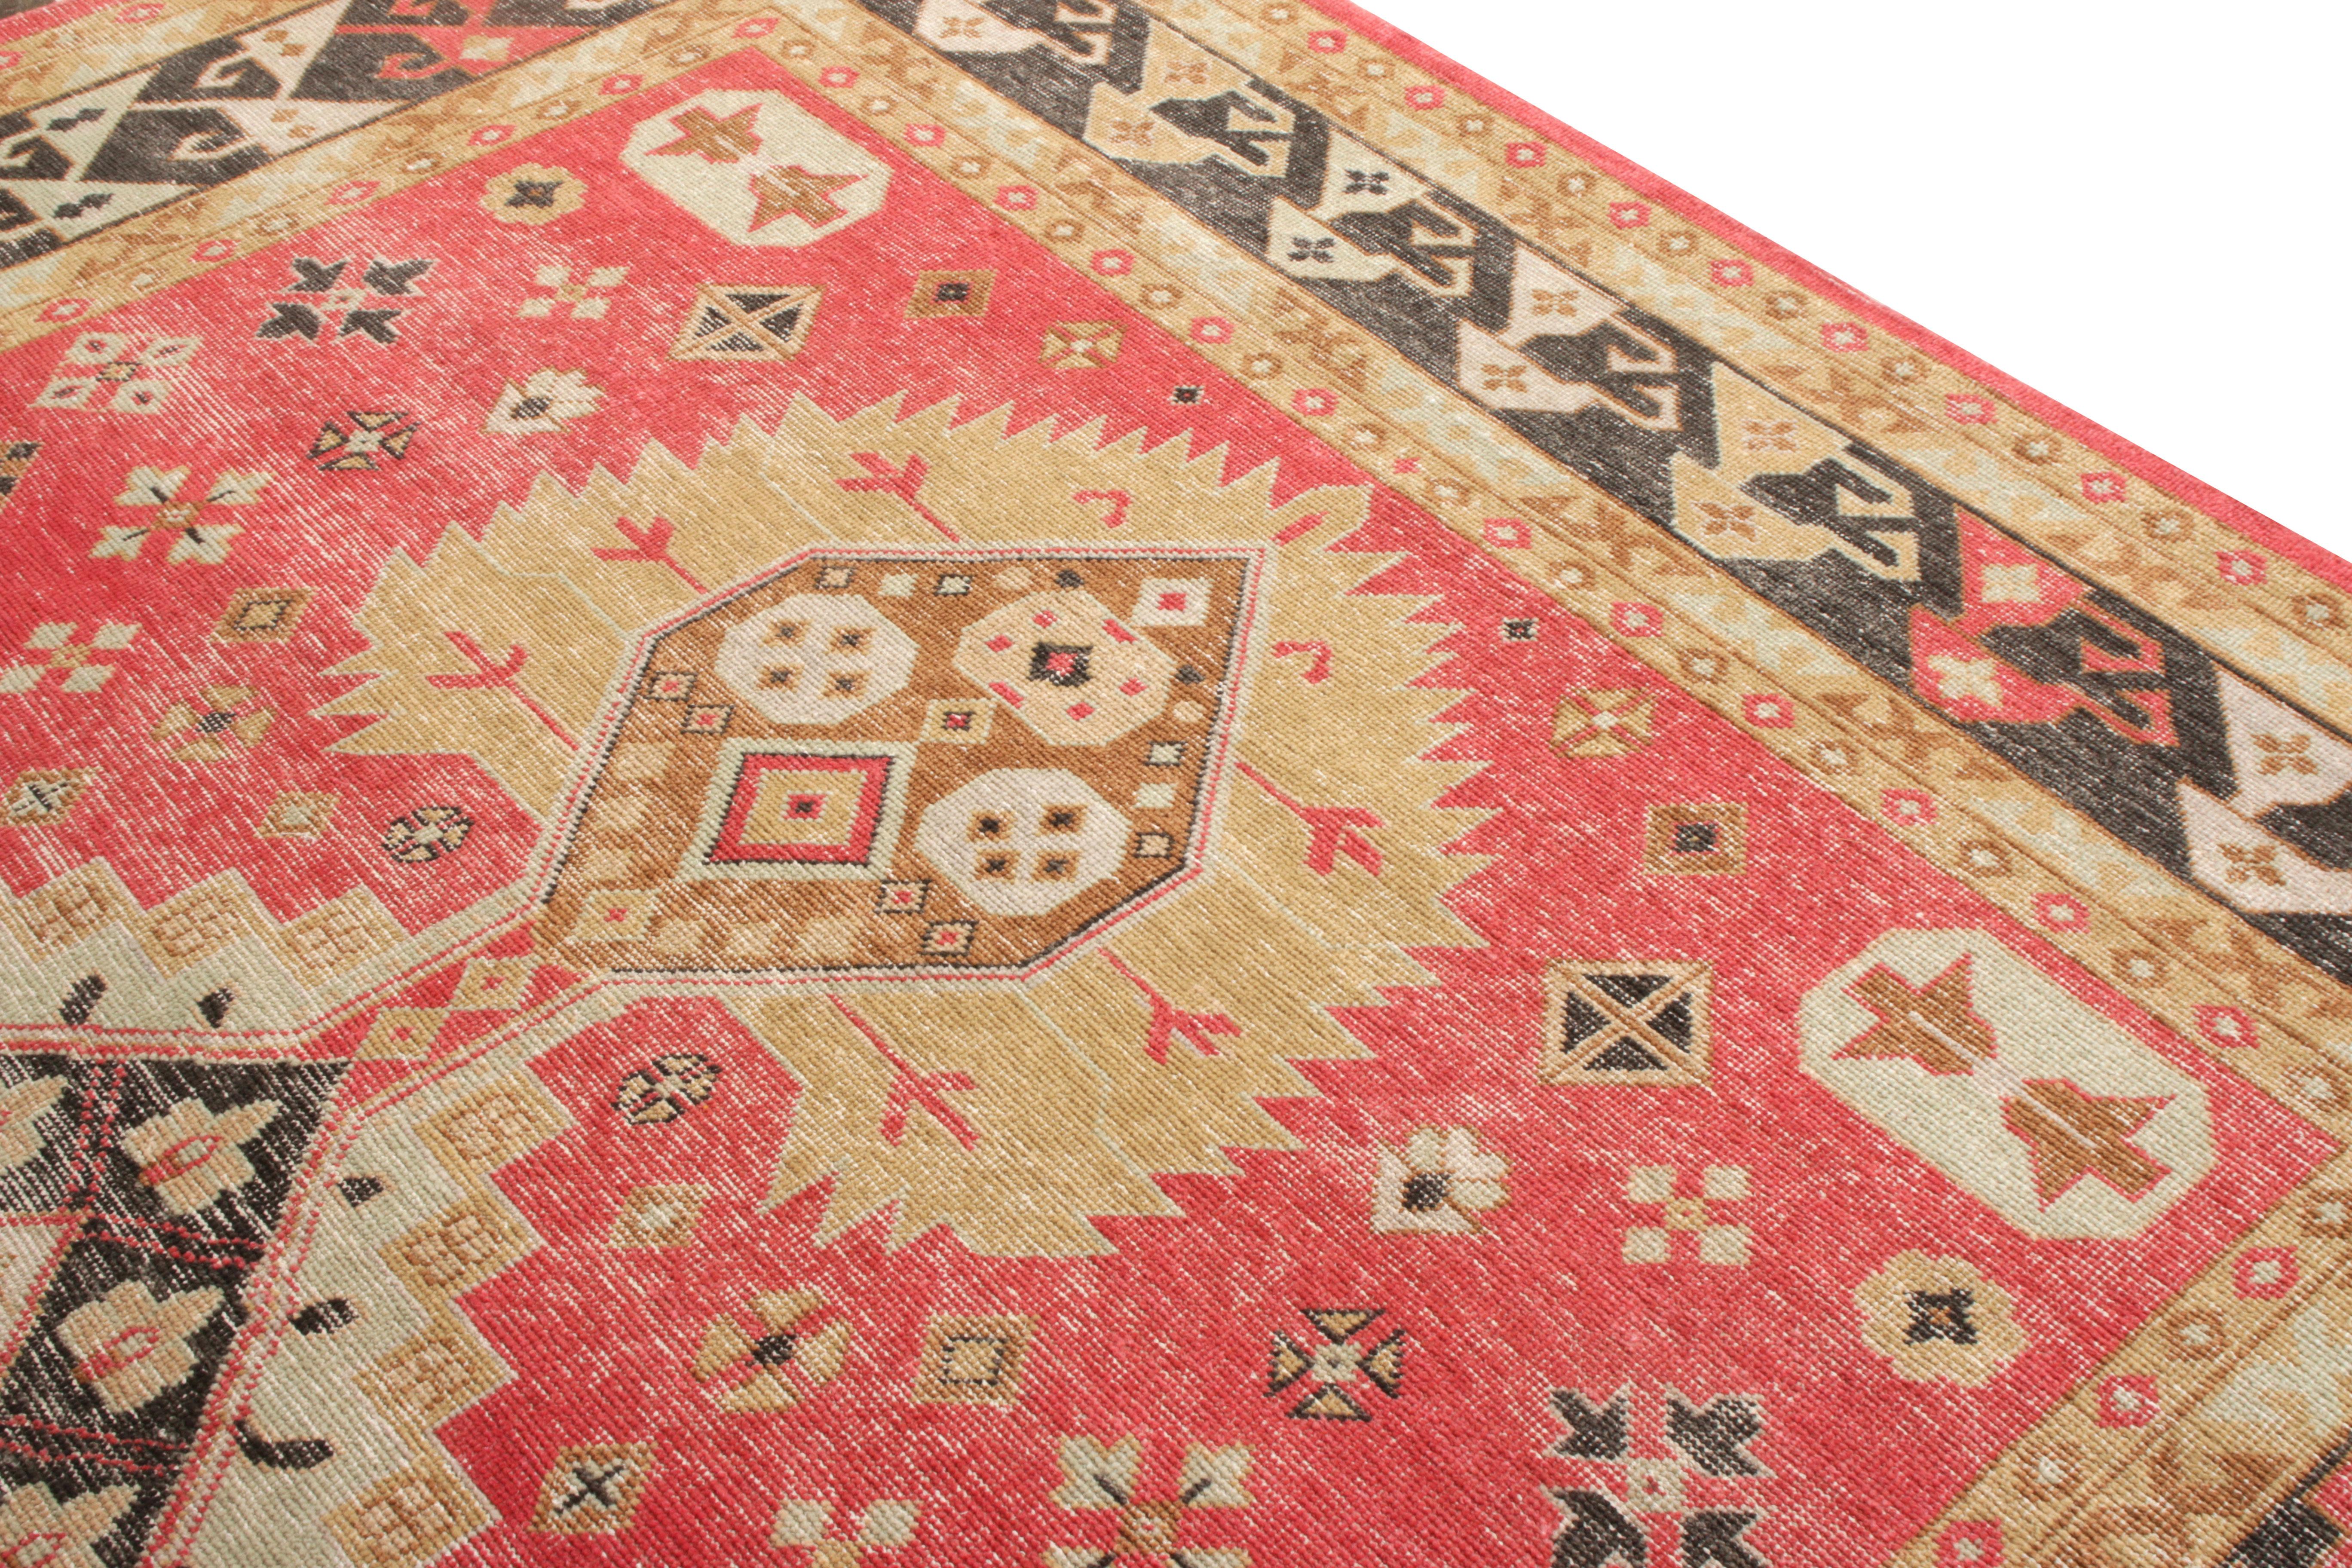 Other Rug & Kilim’s Distressed Style Rug in Red and Beige-Brown Geometric Pattern For Sale